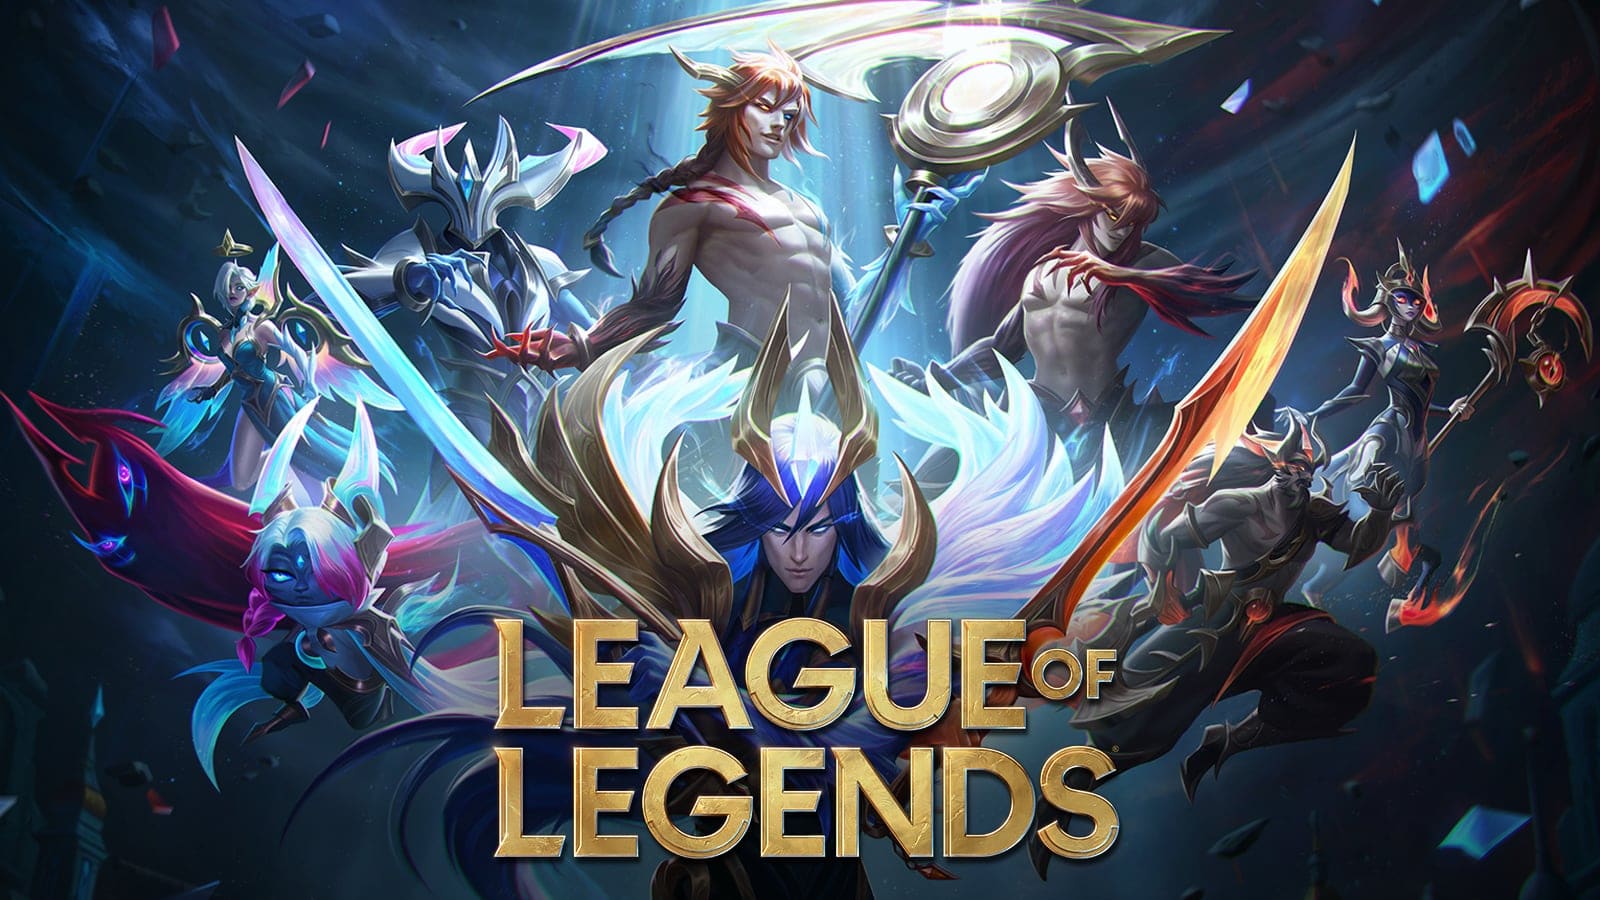 How To Fix The League of Legends Critical Error in Easy Steps